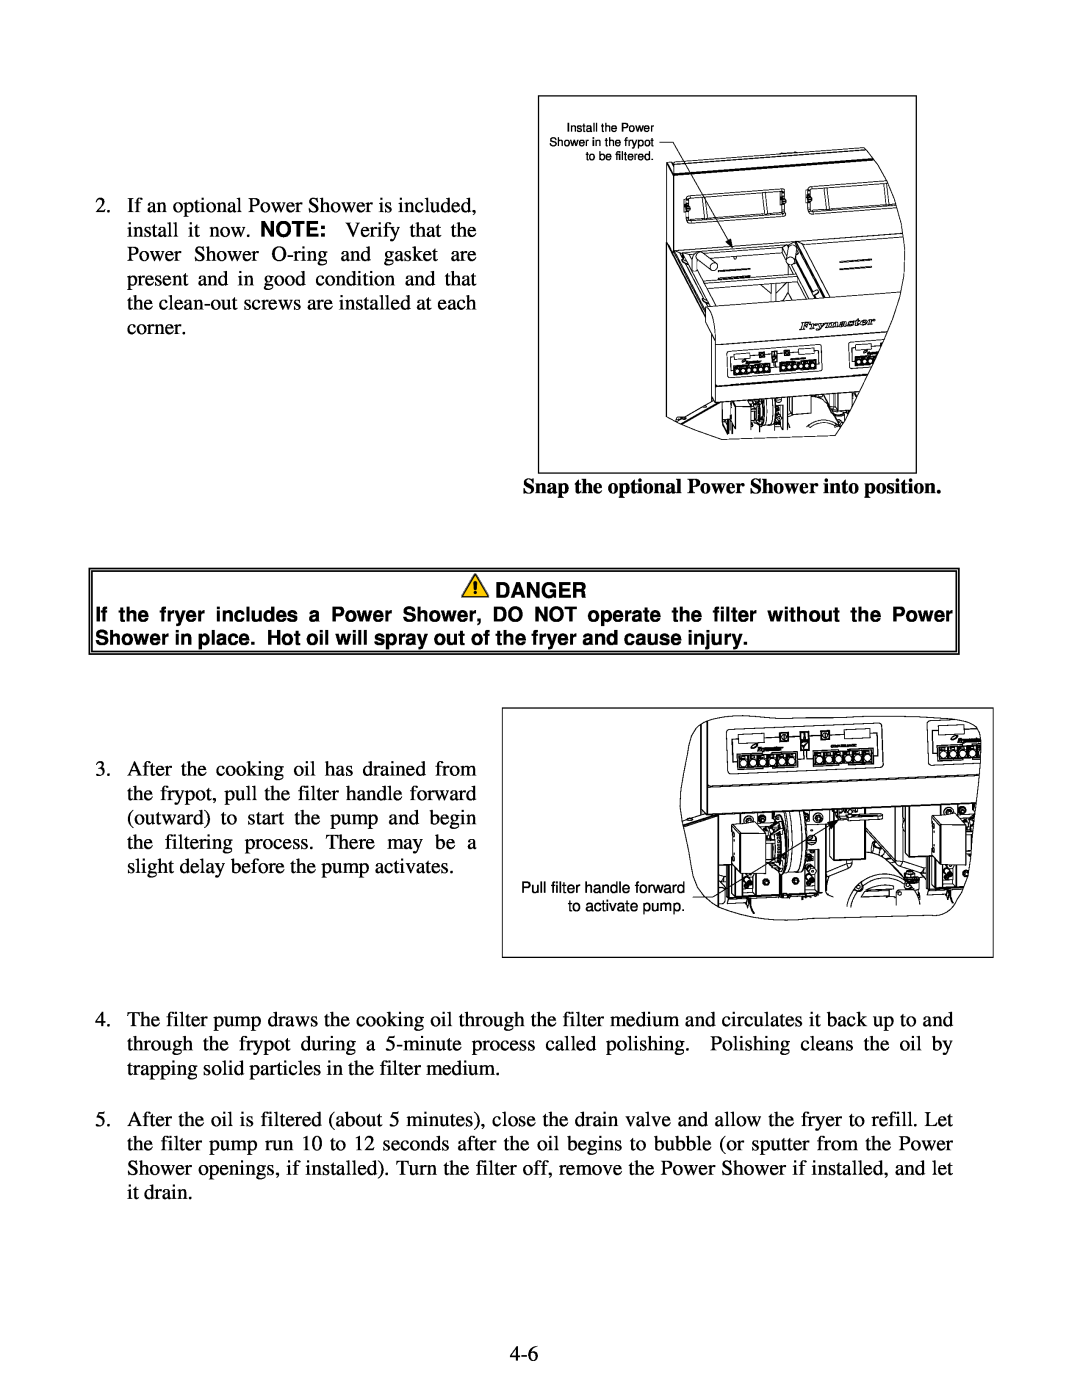 Frymaster H55 operation manual Snap the optional Power Shower into position, Danger 